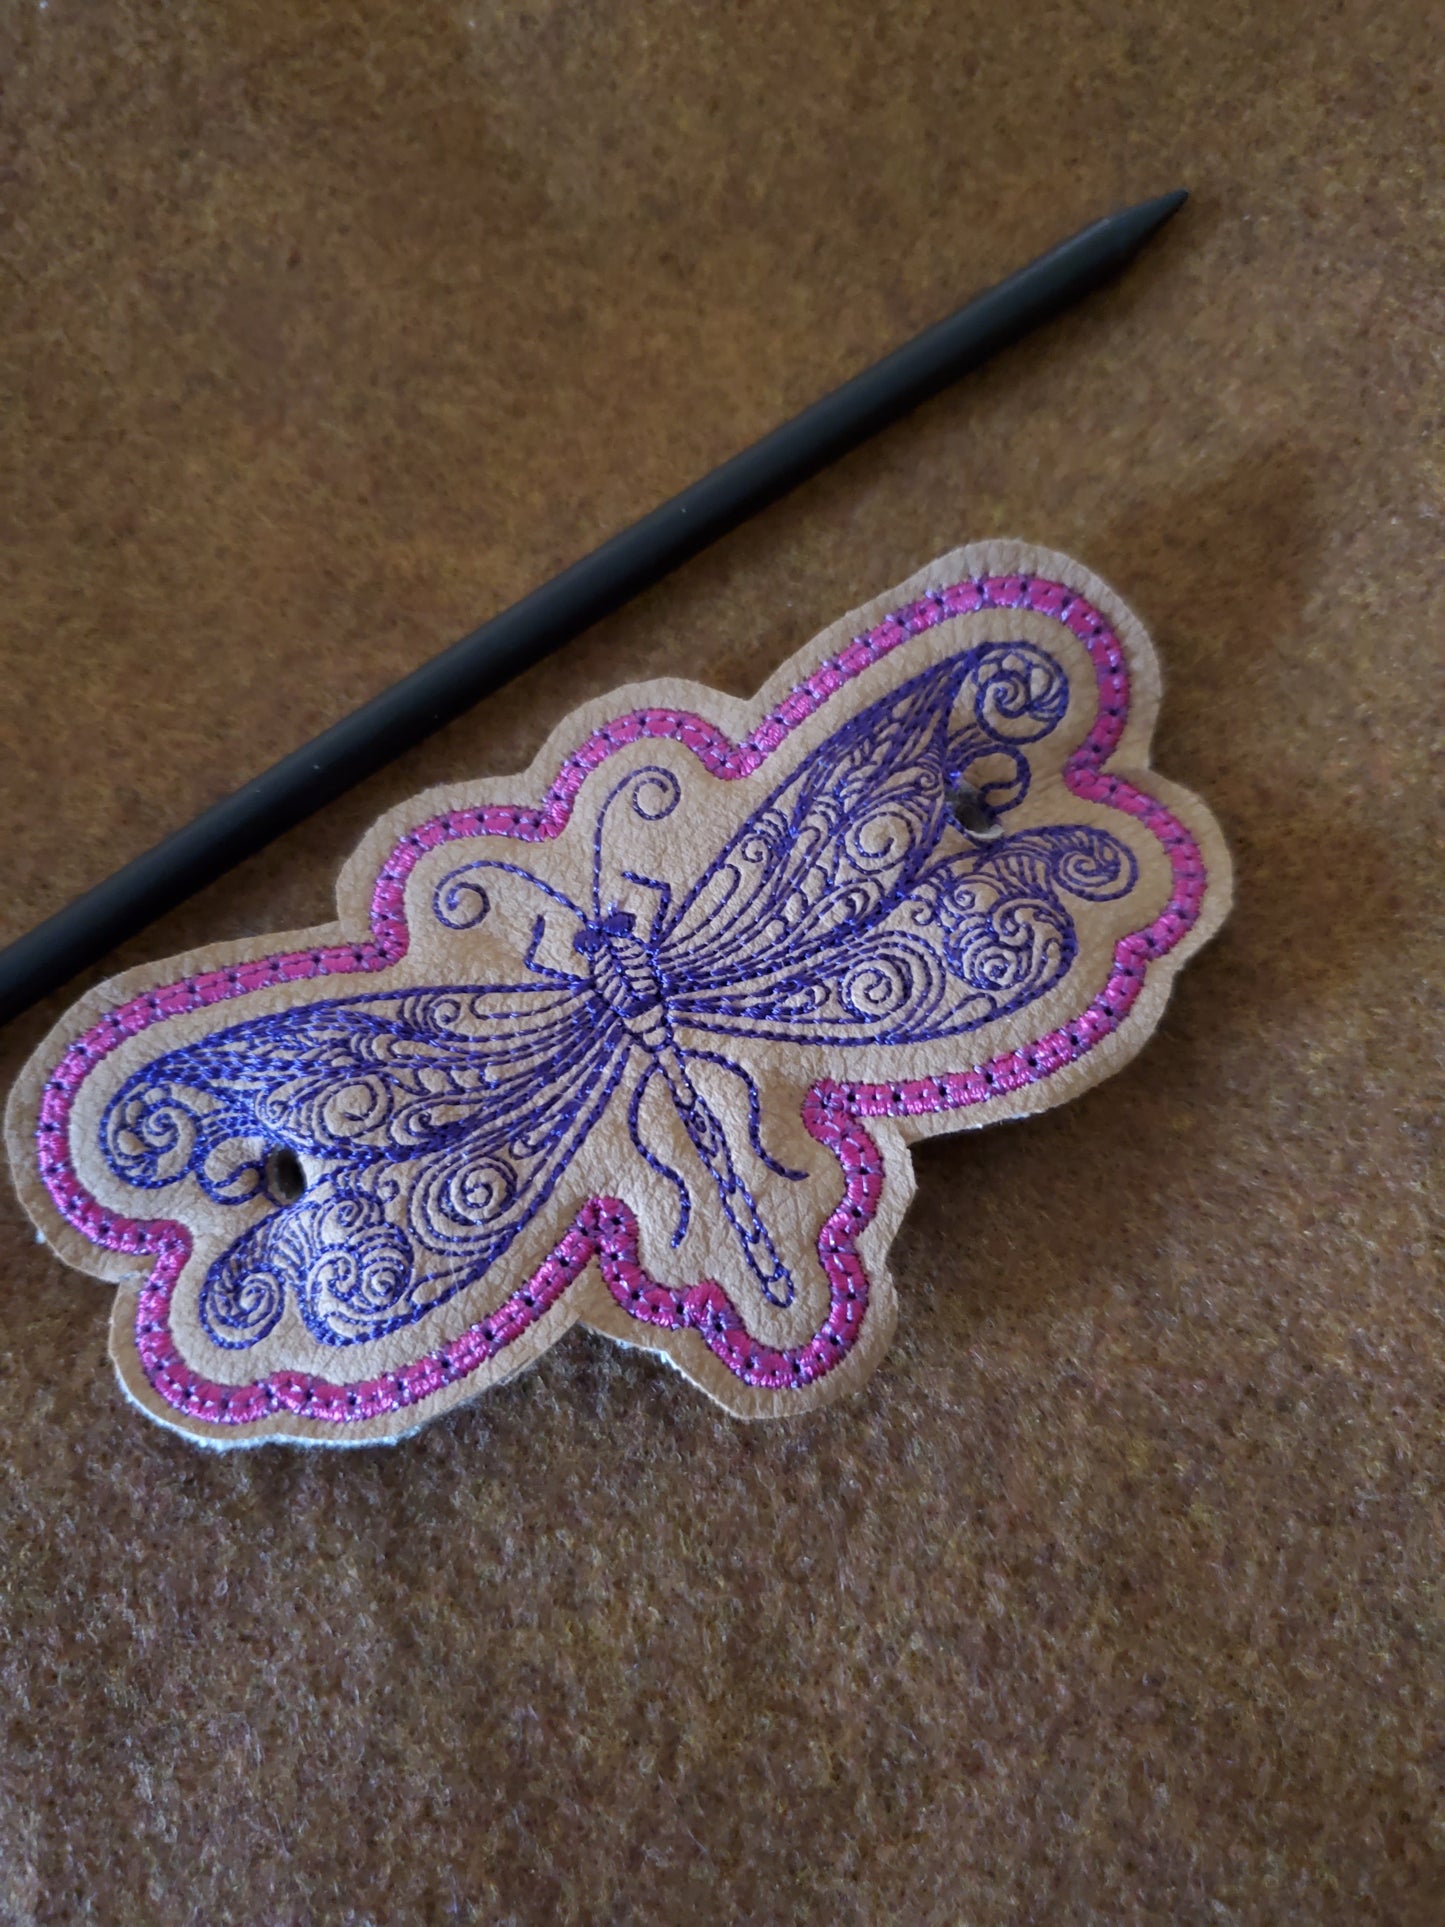 Dragonfly stitched in Purple - Hair bun cover / accessory / hair barrette